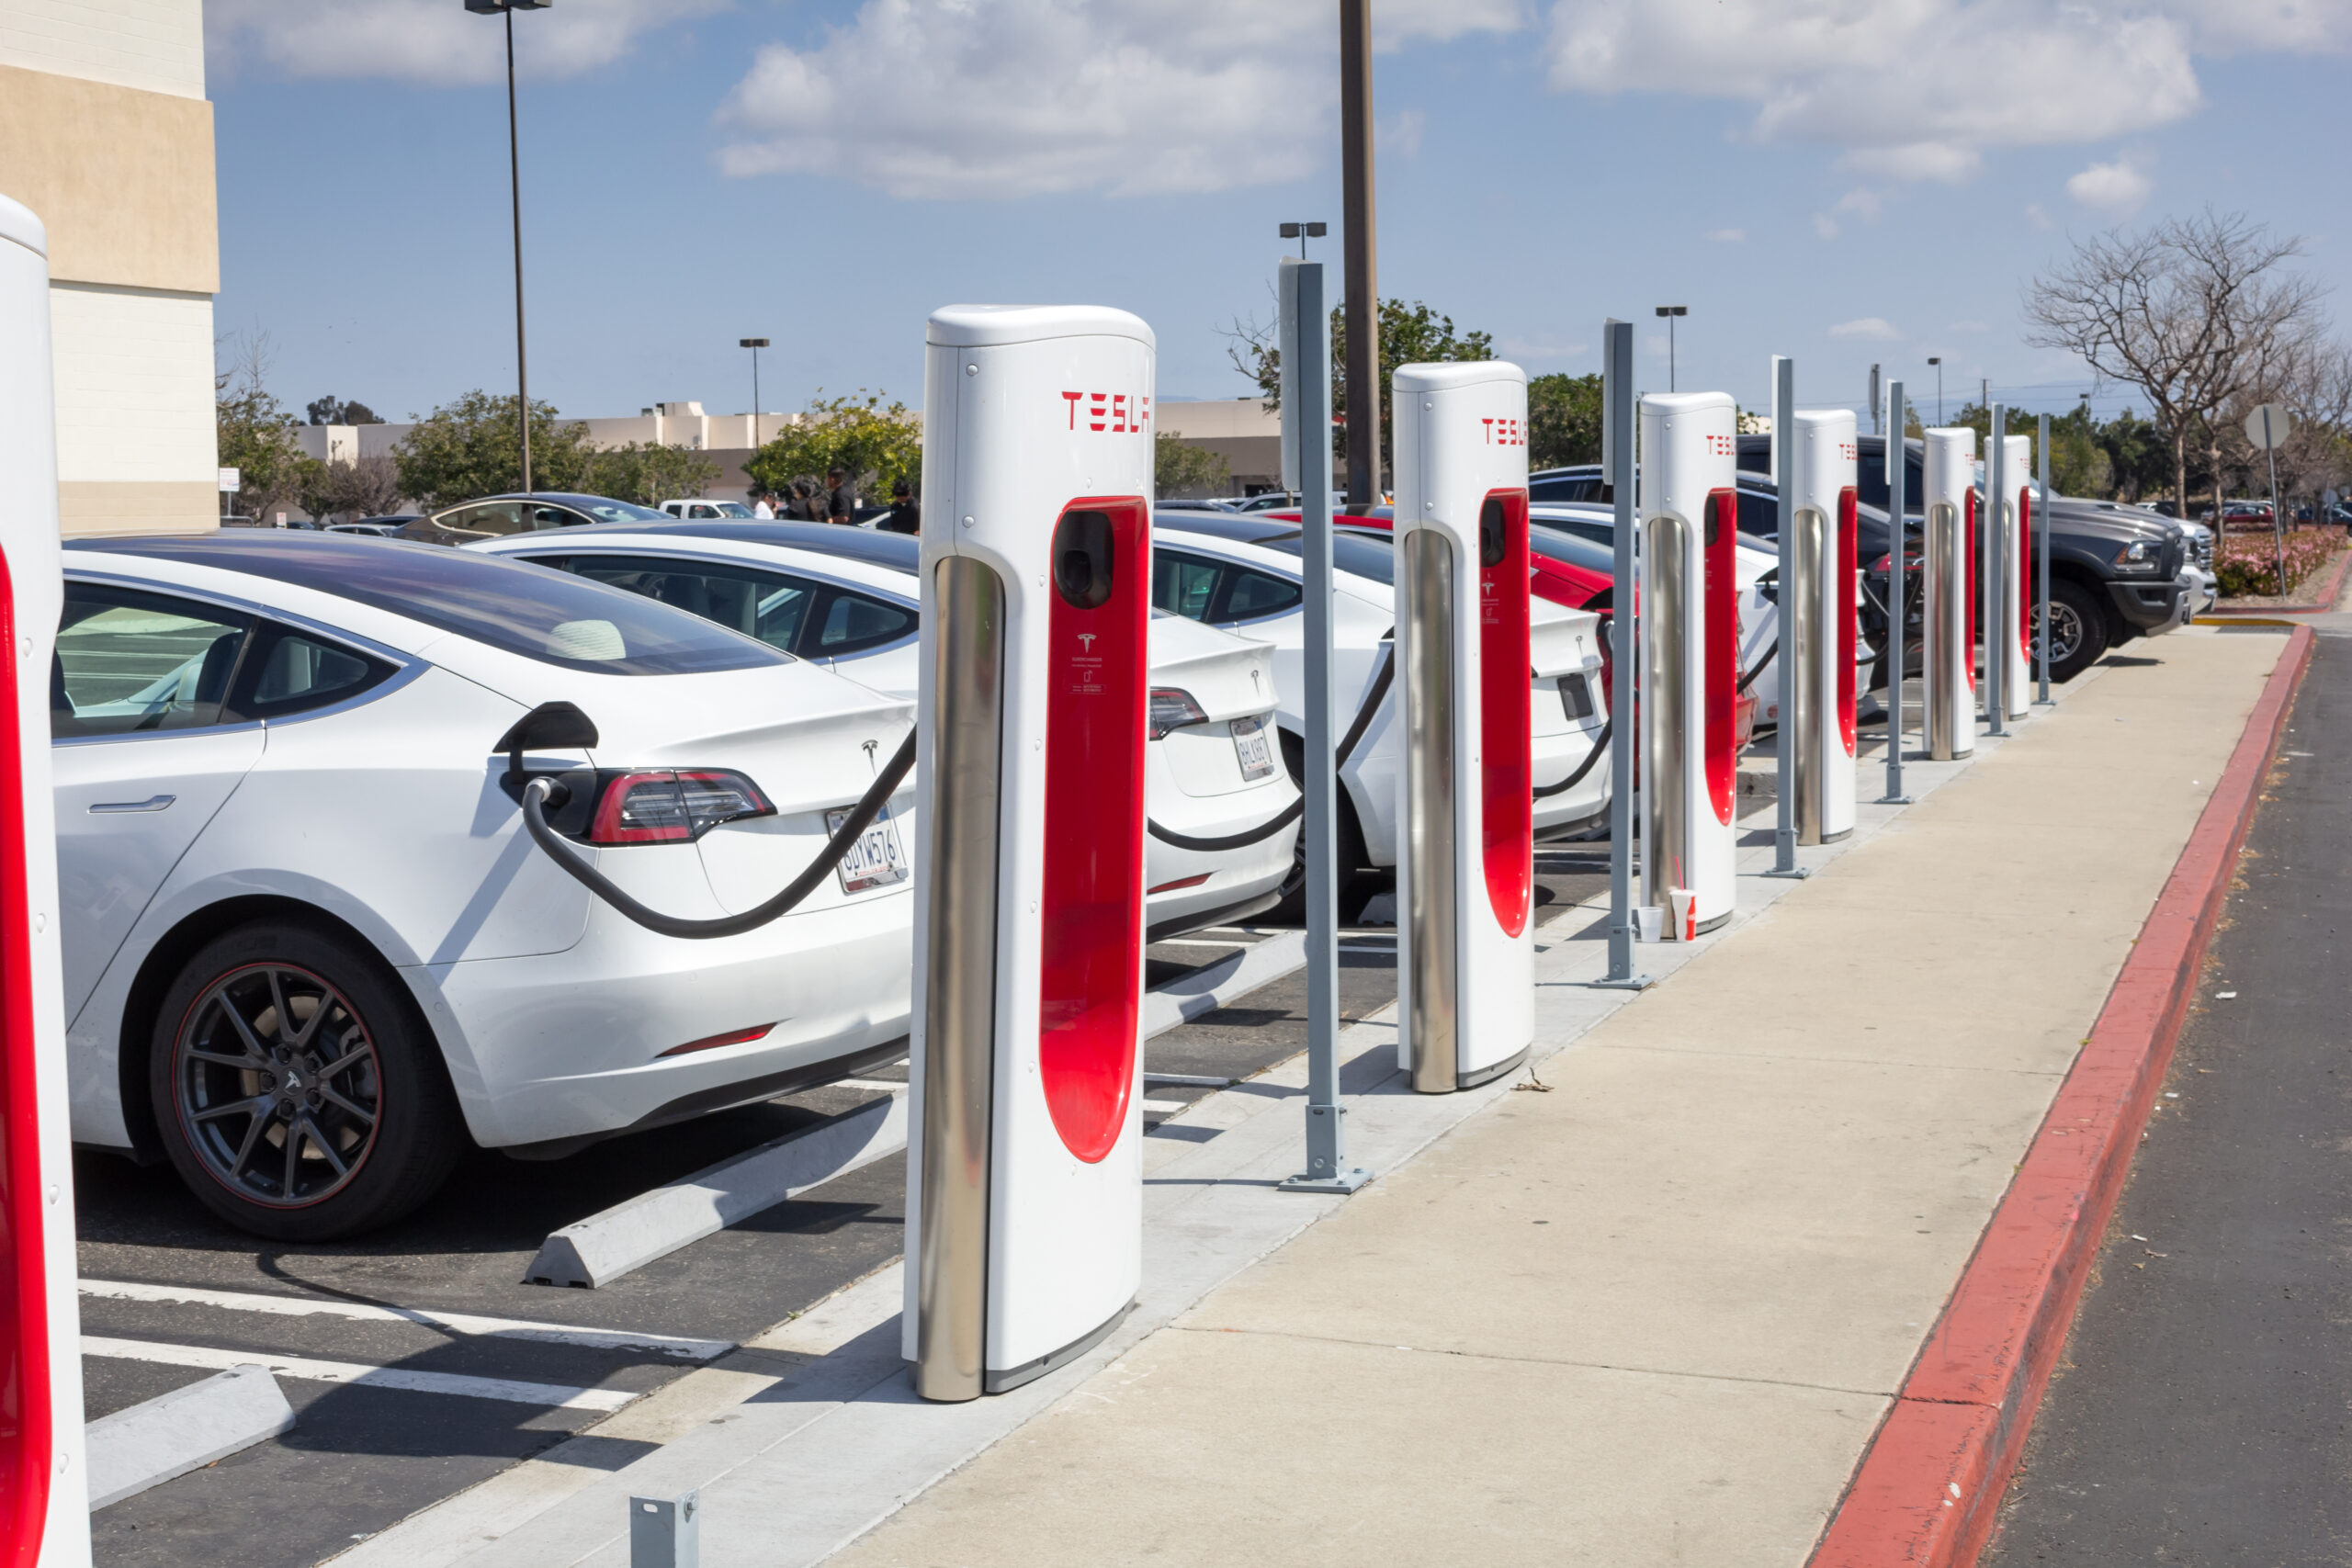 Proposed electric vehicles tax credit prioritizes labor unions over